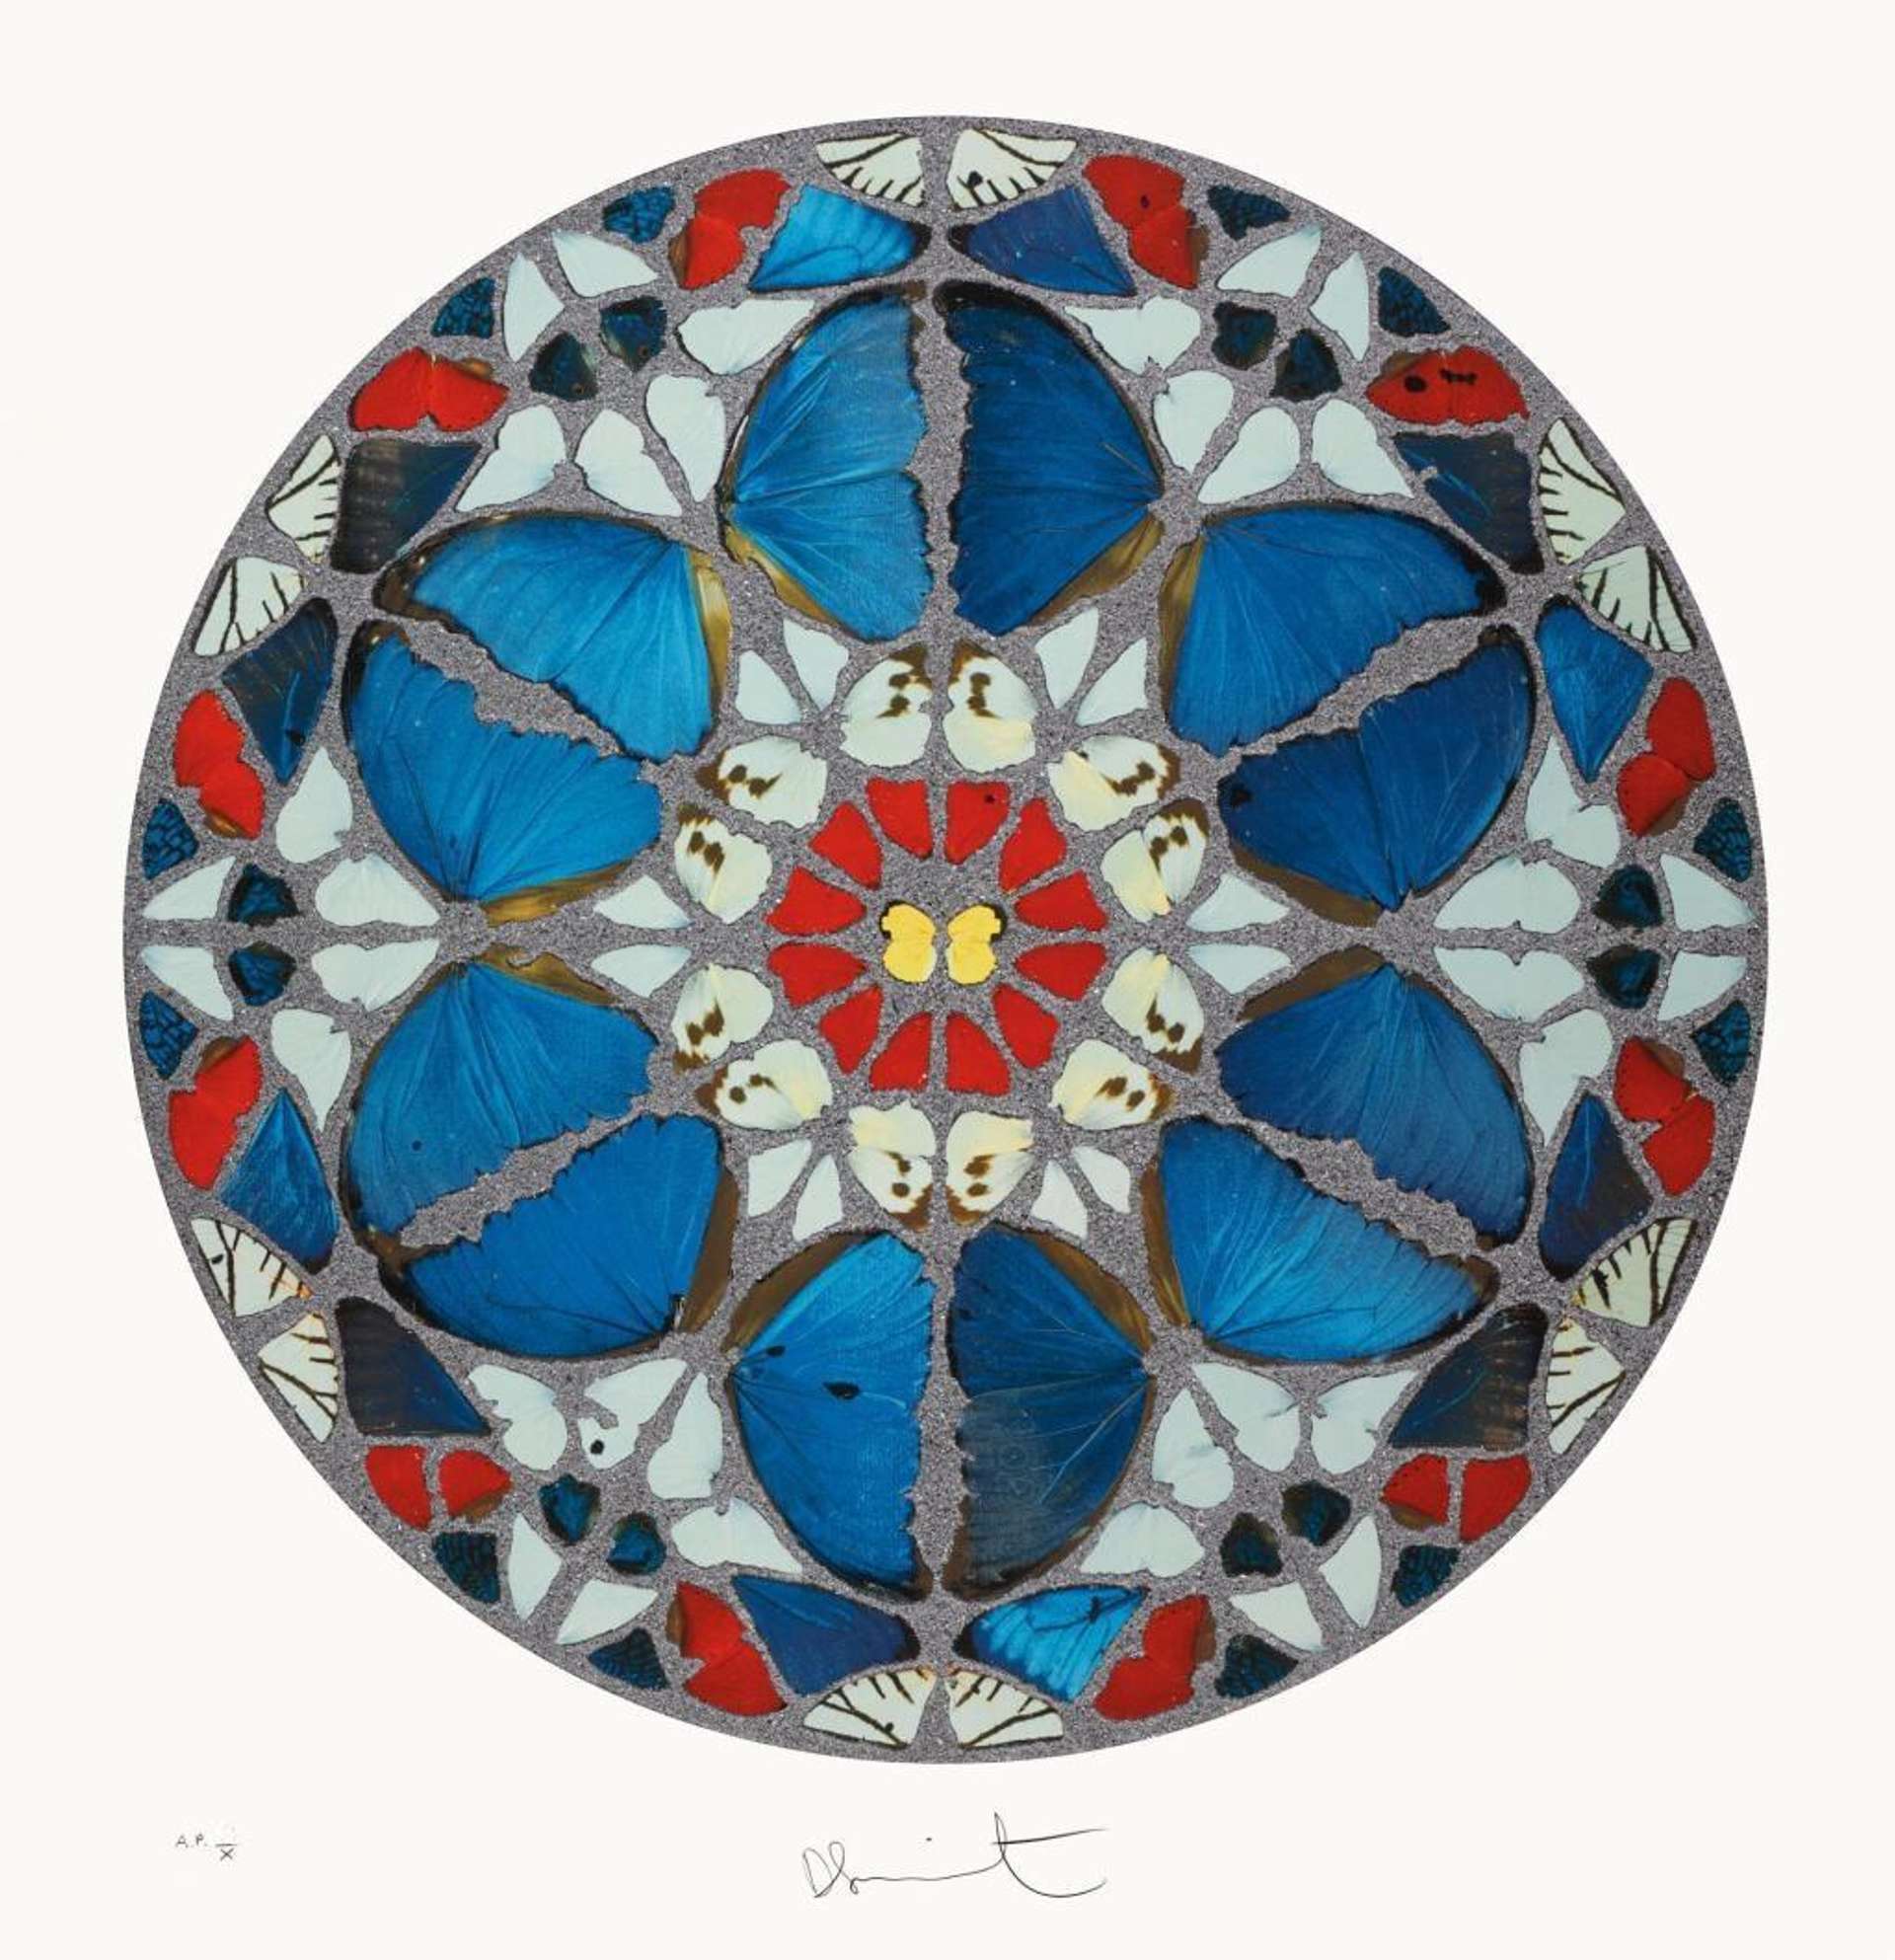 In this print, Hirst produces an intricate pattern formed of concentric circles made out of butterfly wings. The hypnotic effect of the pattern is captivating. In the centre of the composition is a yellow butterfly.